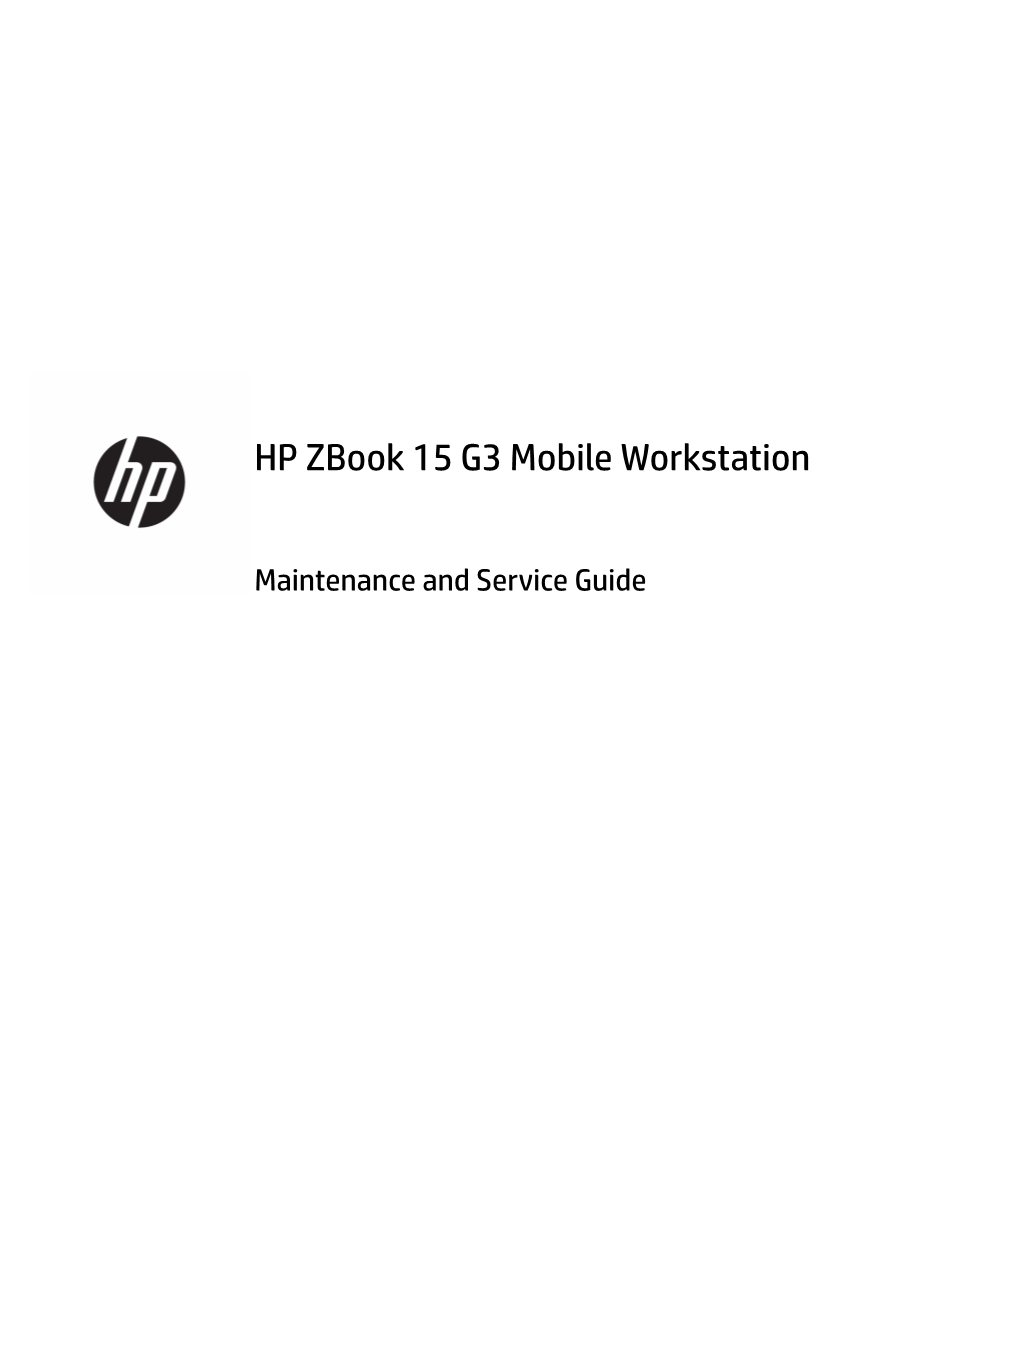 HP Zbook 15 G3 Mobile Workstation Maintenance and Service Guide